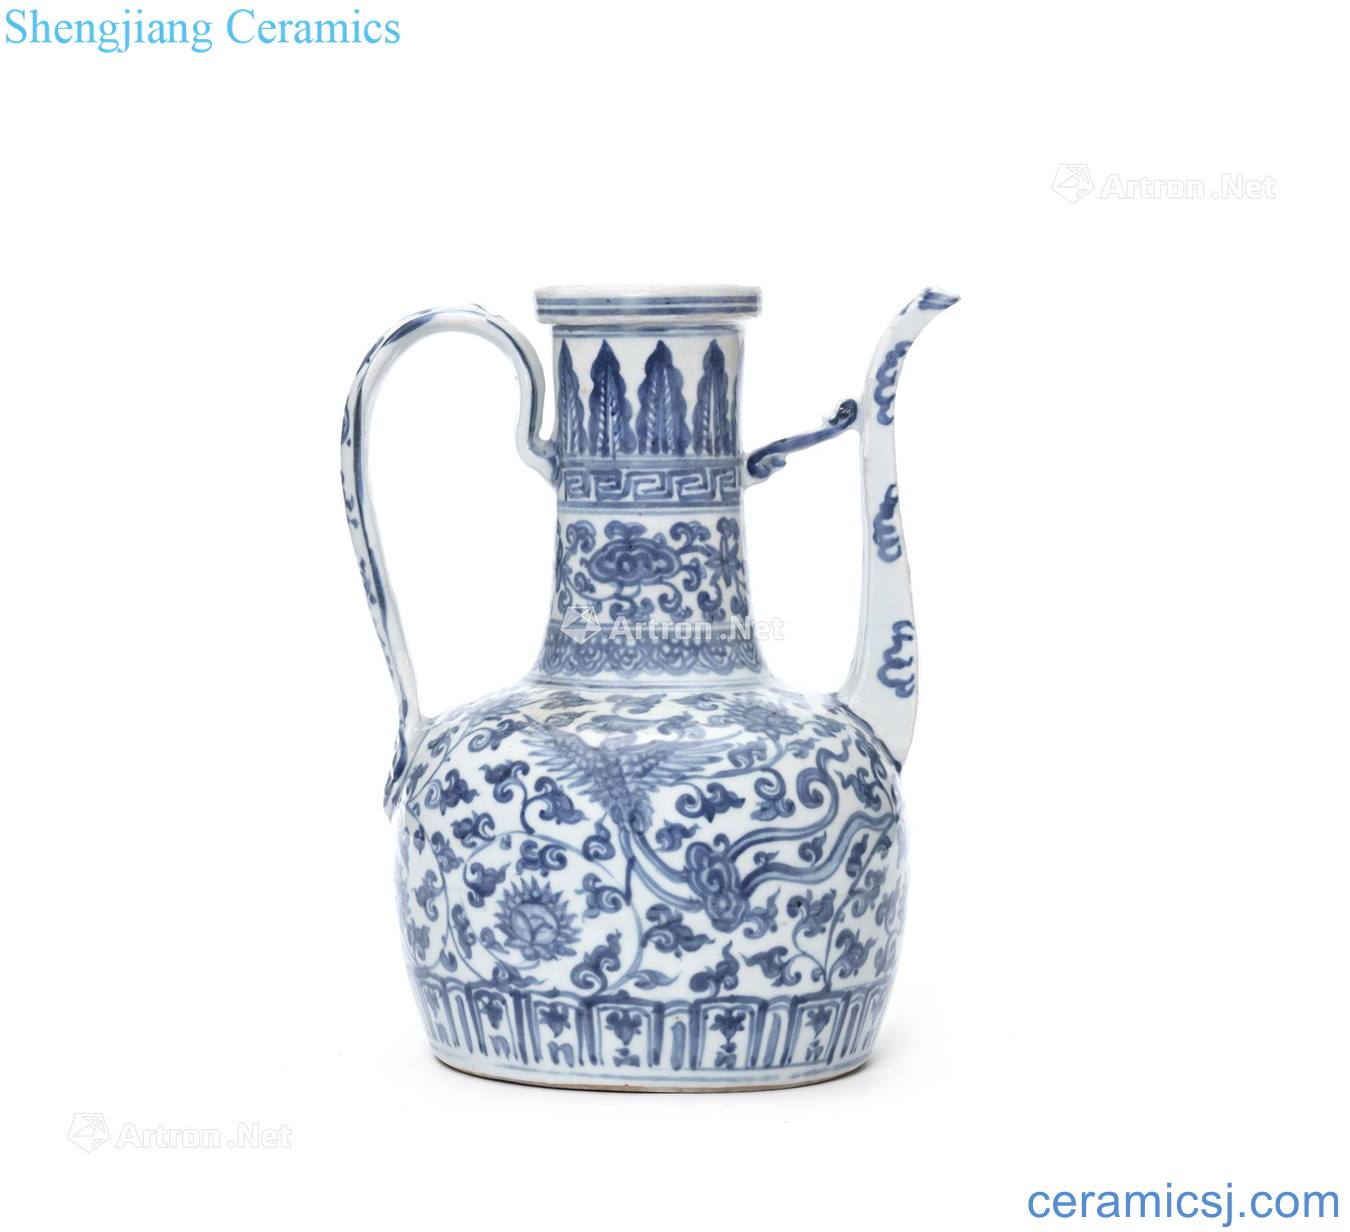 About 1500 years Blue and white phoenix wear grain ewer